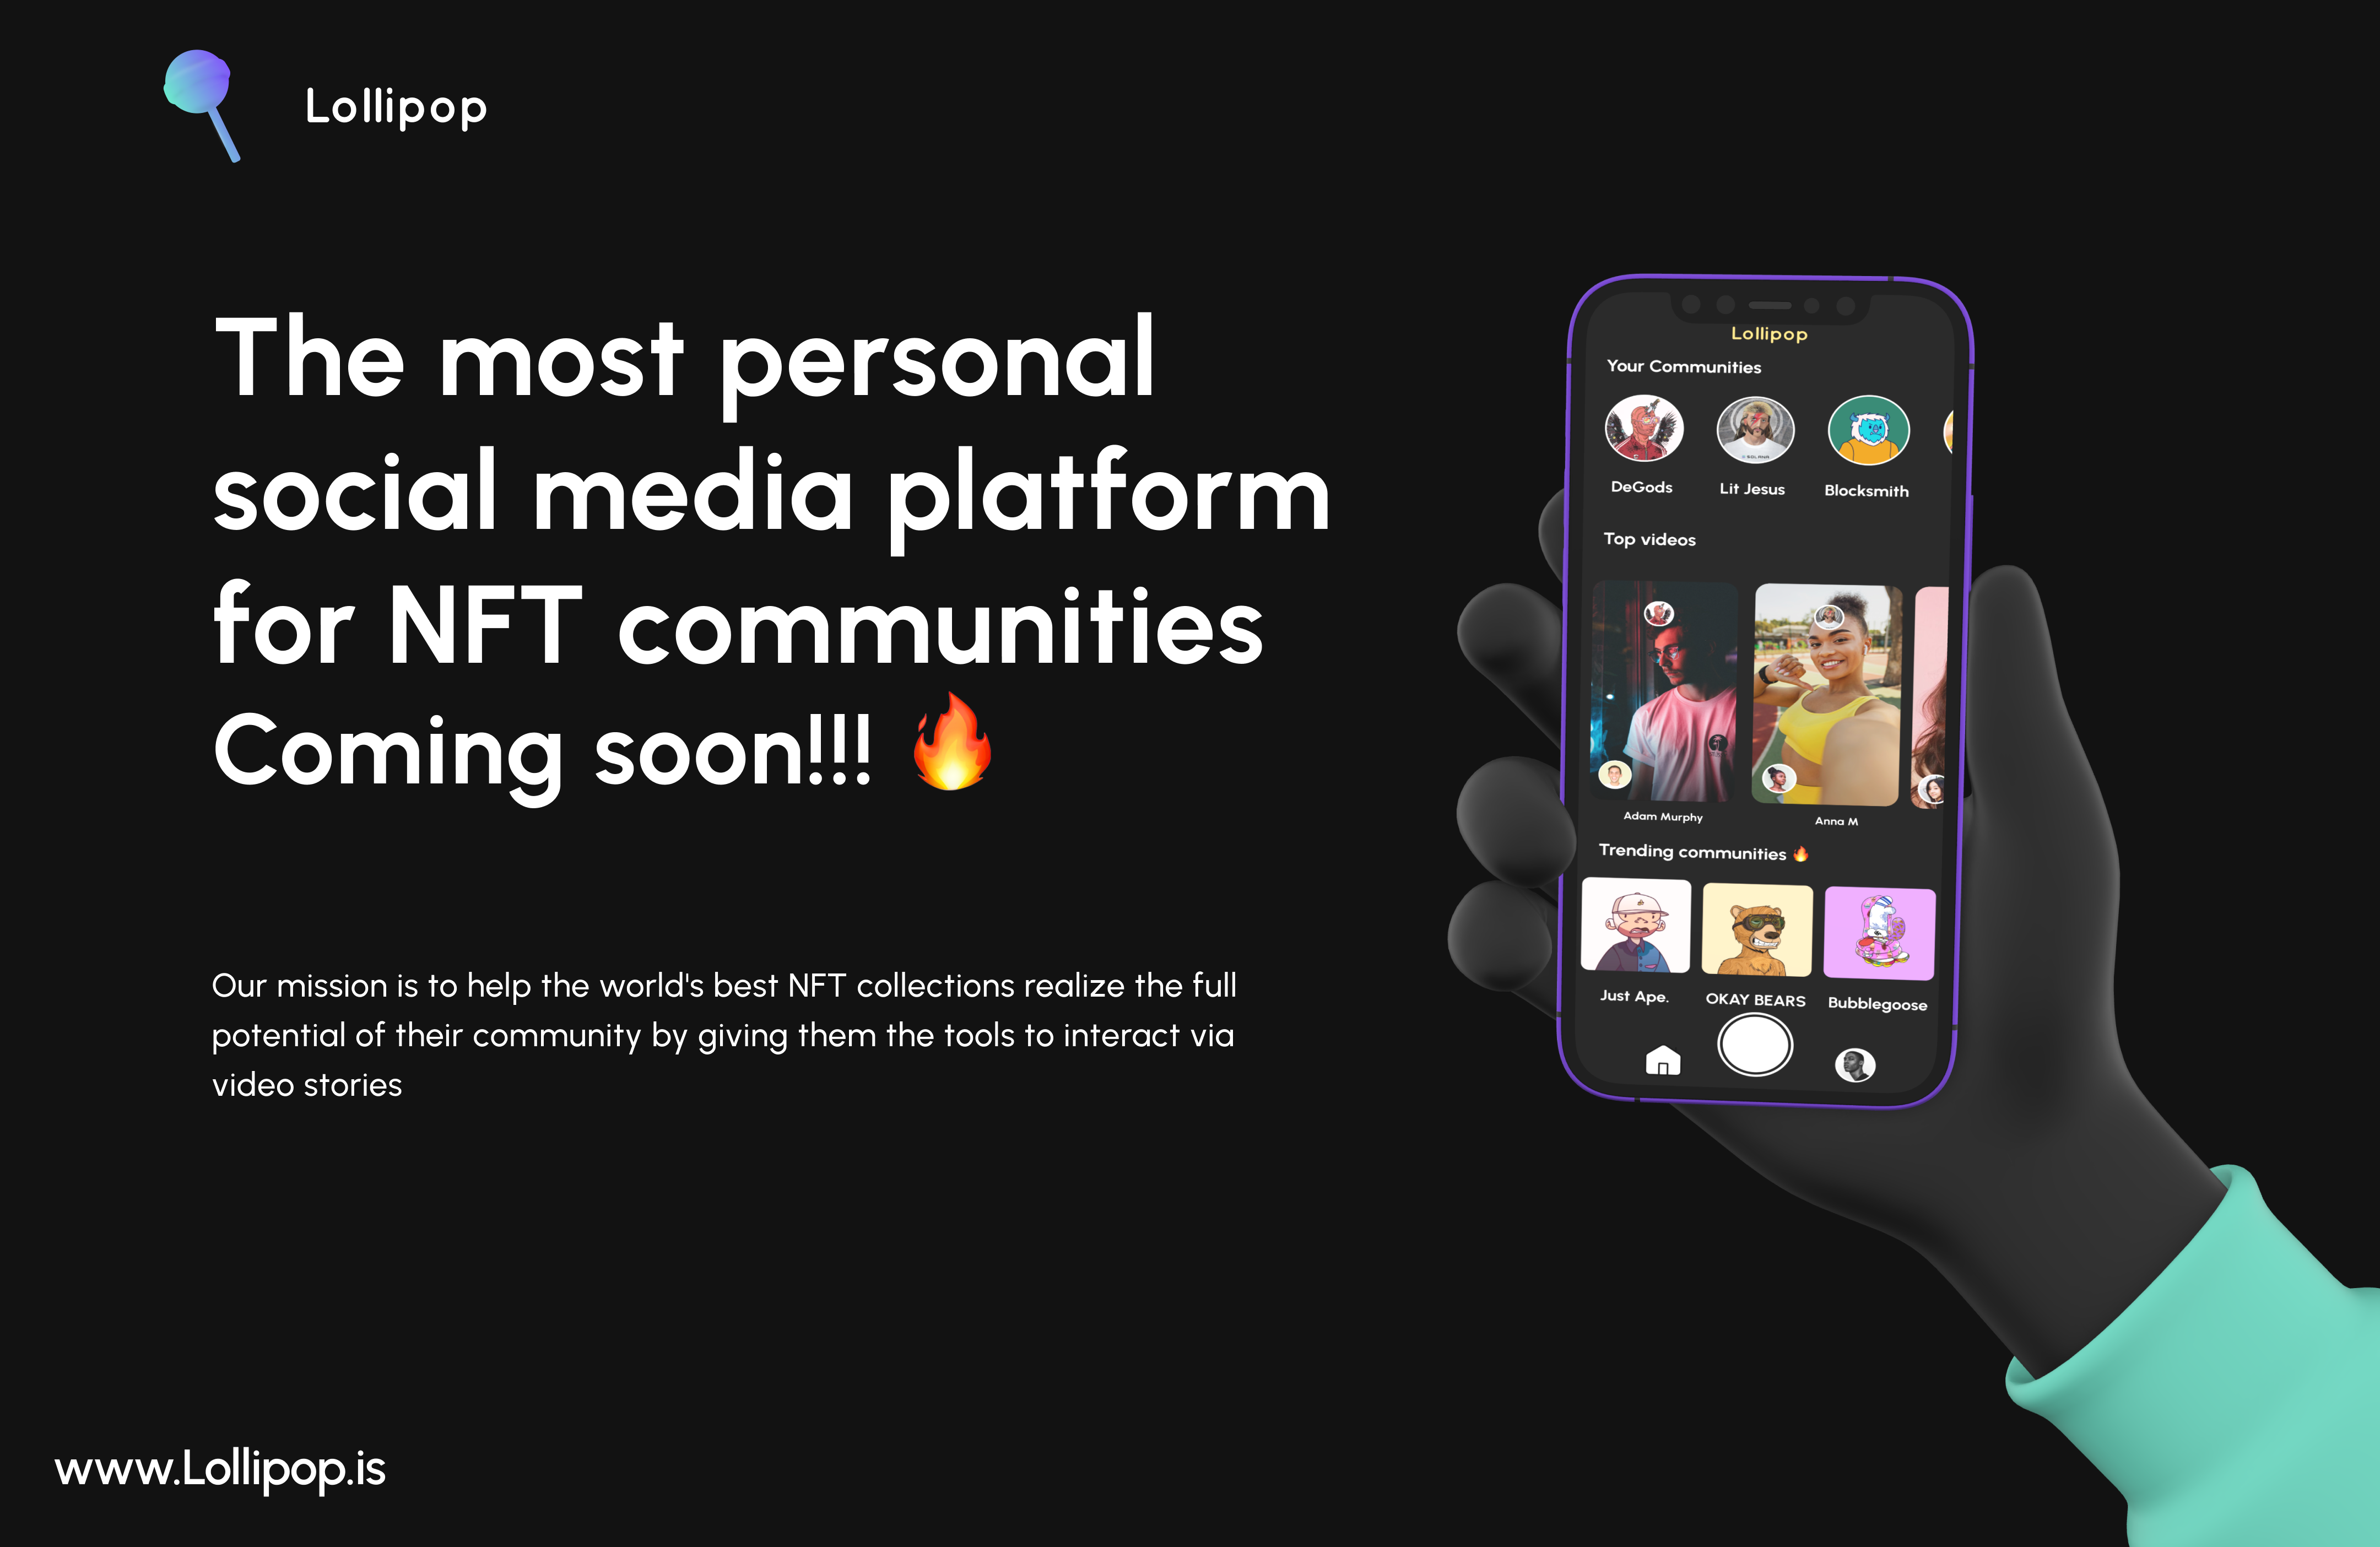 Serial Startup Founder Unveils Exciting New Social Media App For NFT Communities